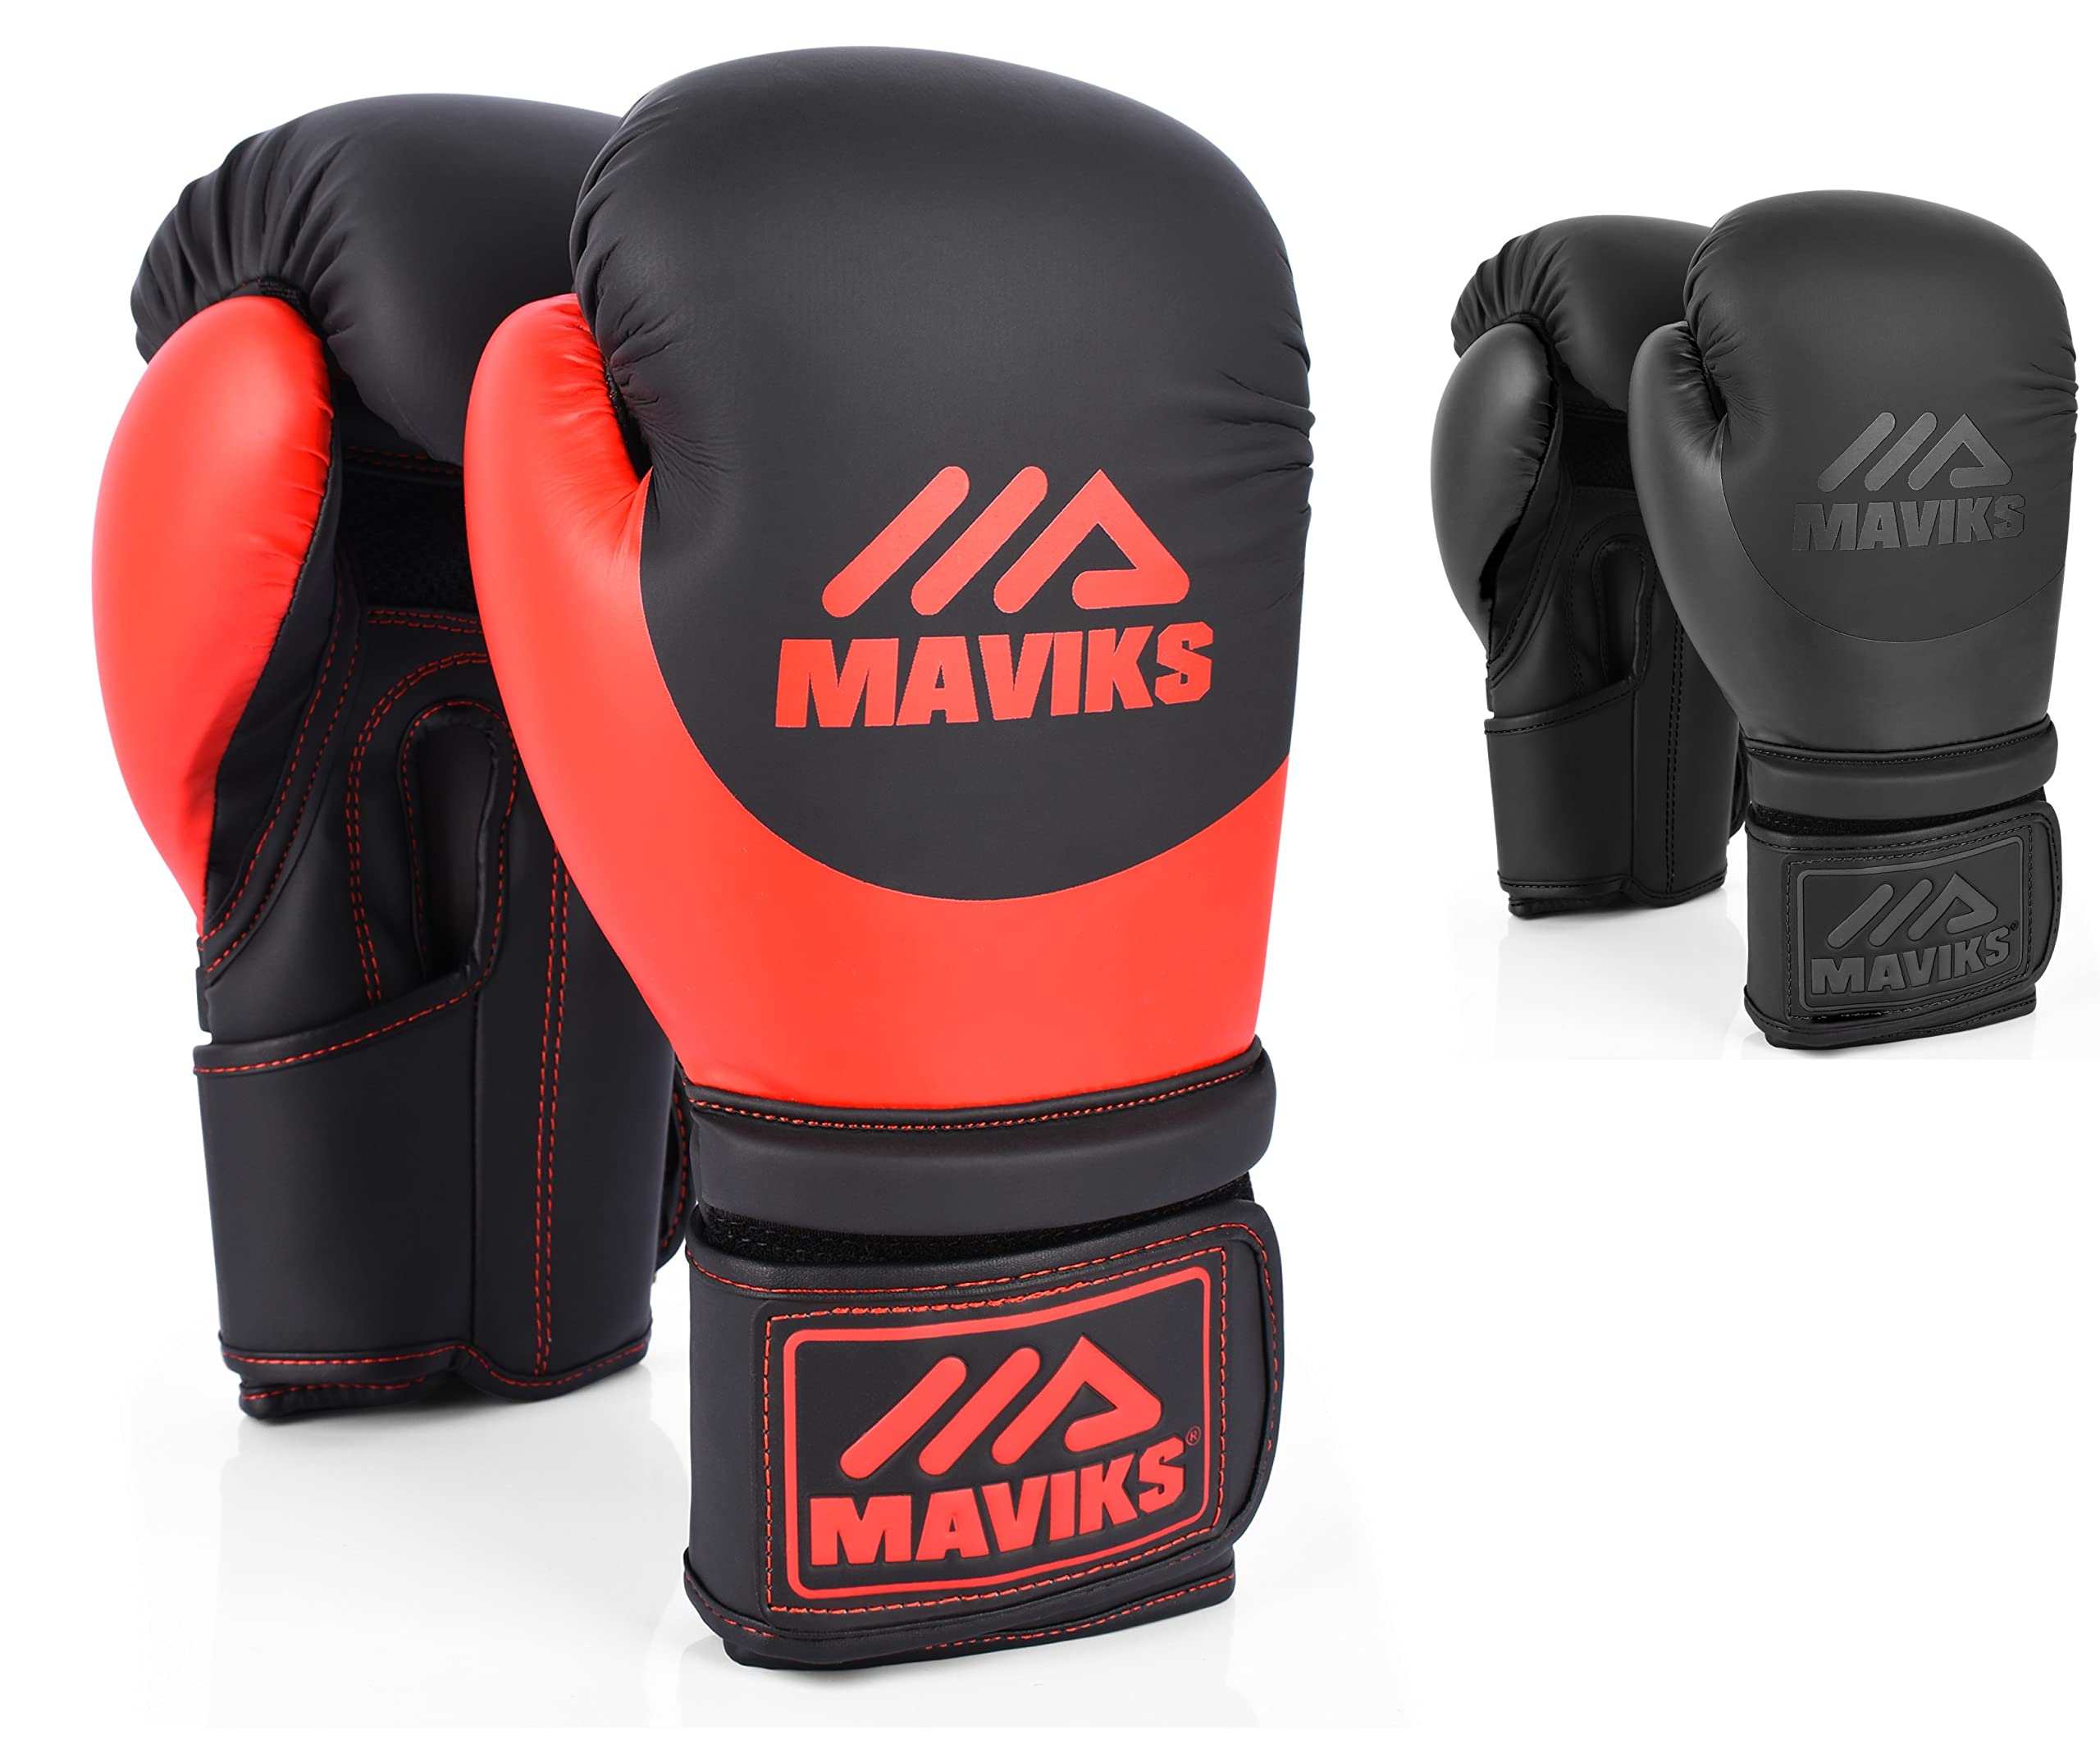 MAVIKS Boxing Gloves for Men and Women | Non-Toxic Heavy Bag Gloves | for  Muay Thai, Sparring, MMA Training, Punching Heavy Bag Mitts Workout  Training Gloves 16 oz Red